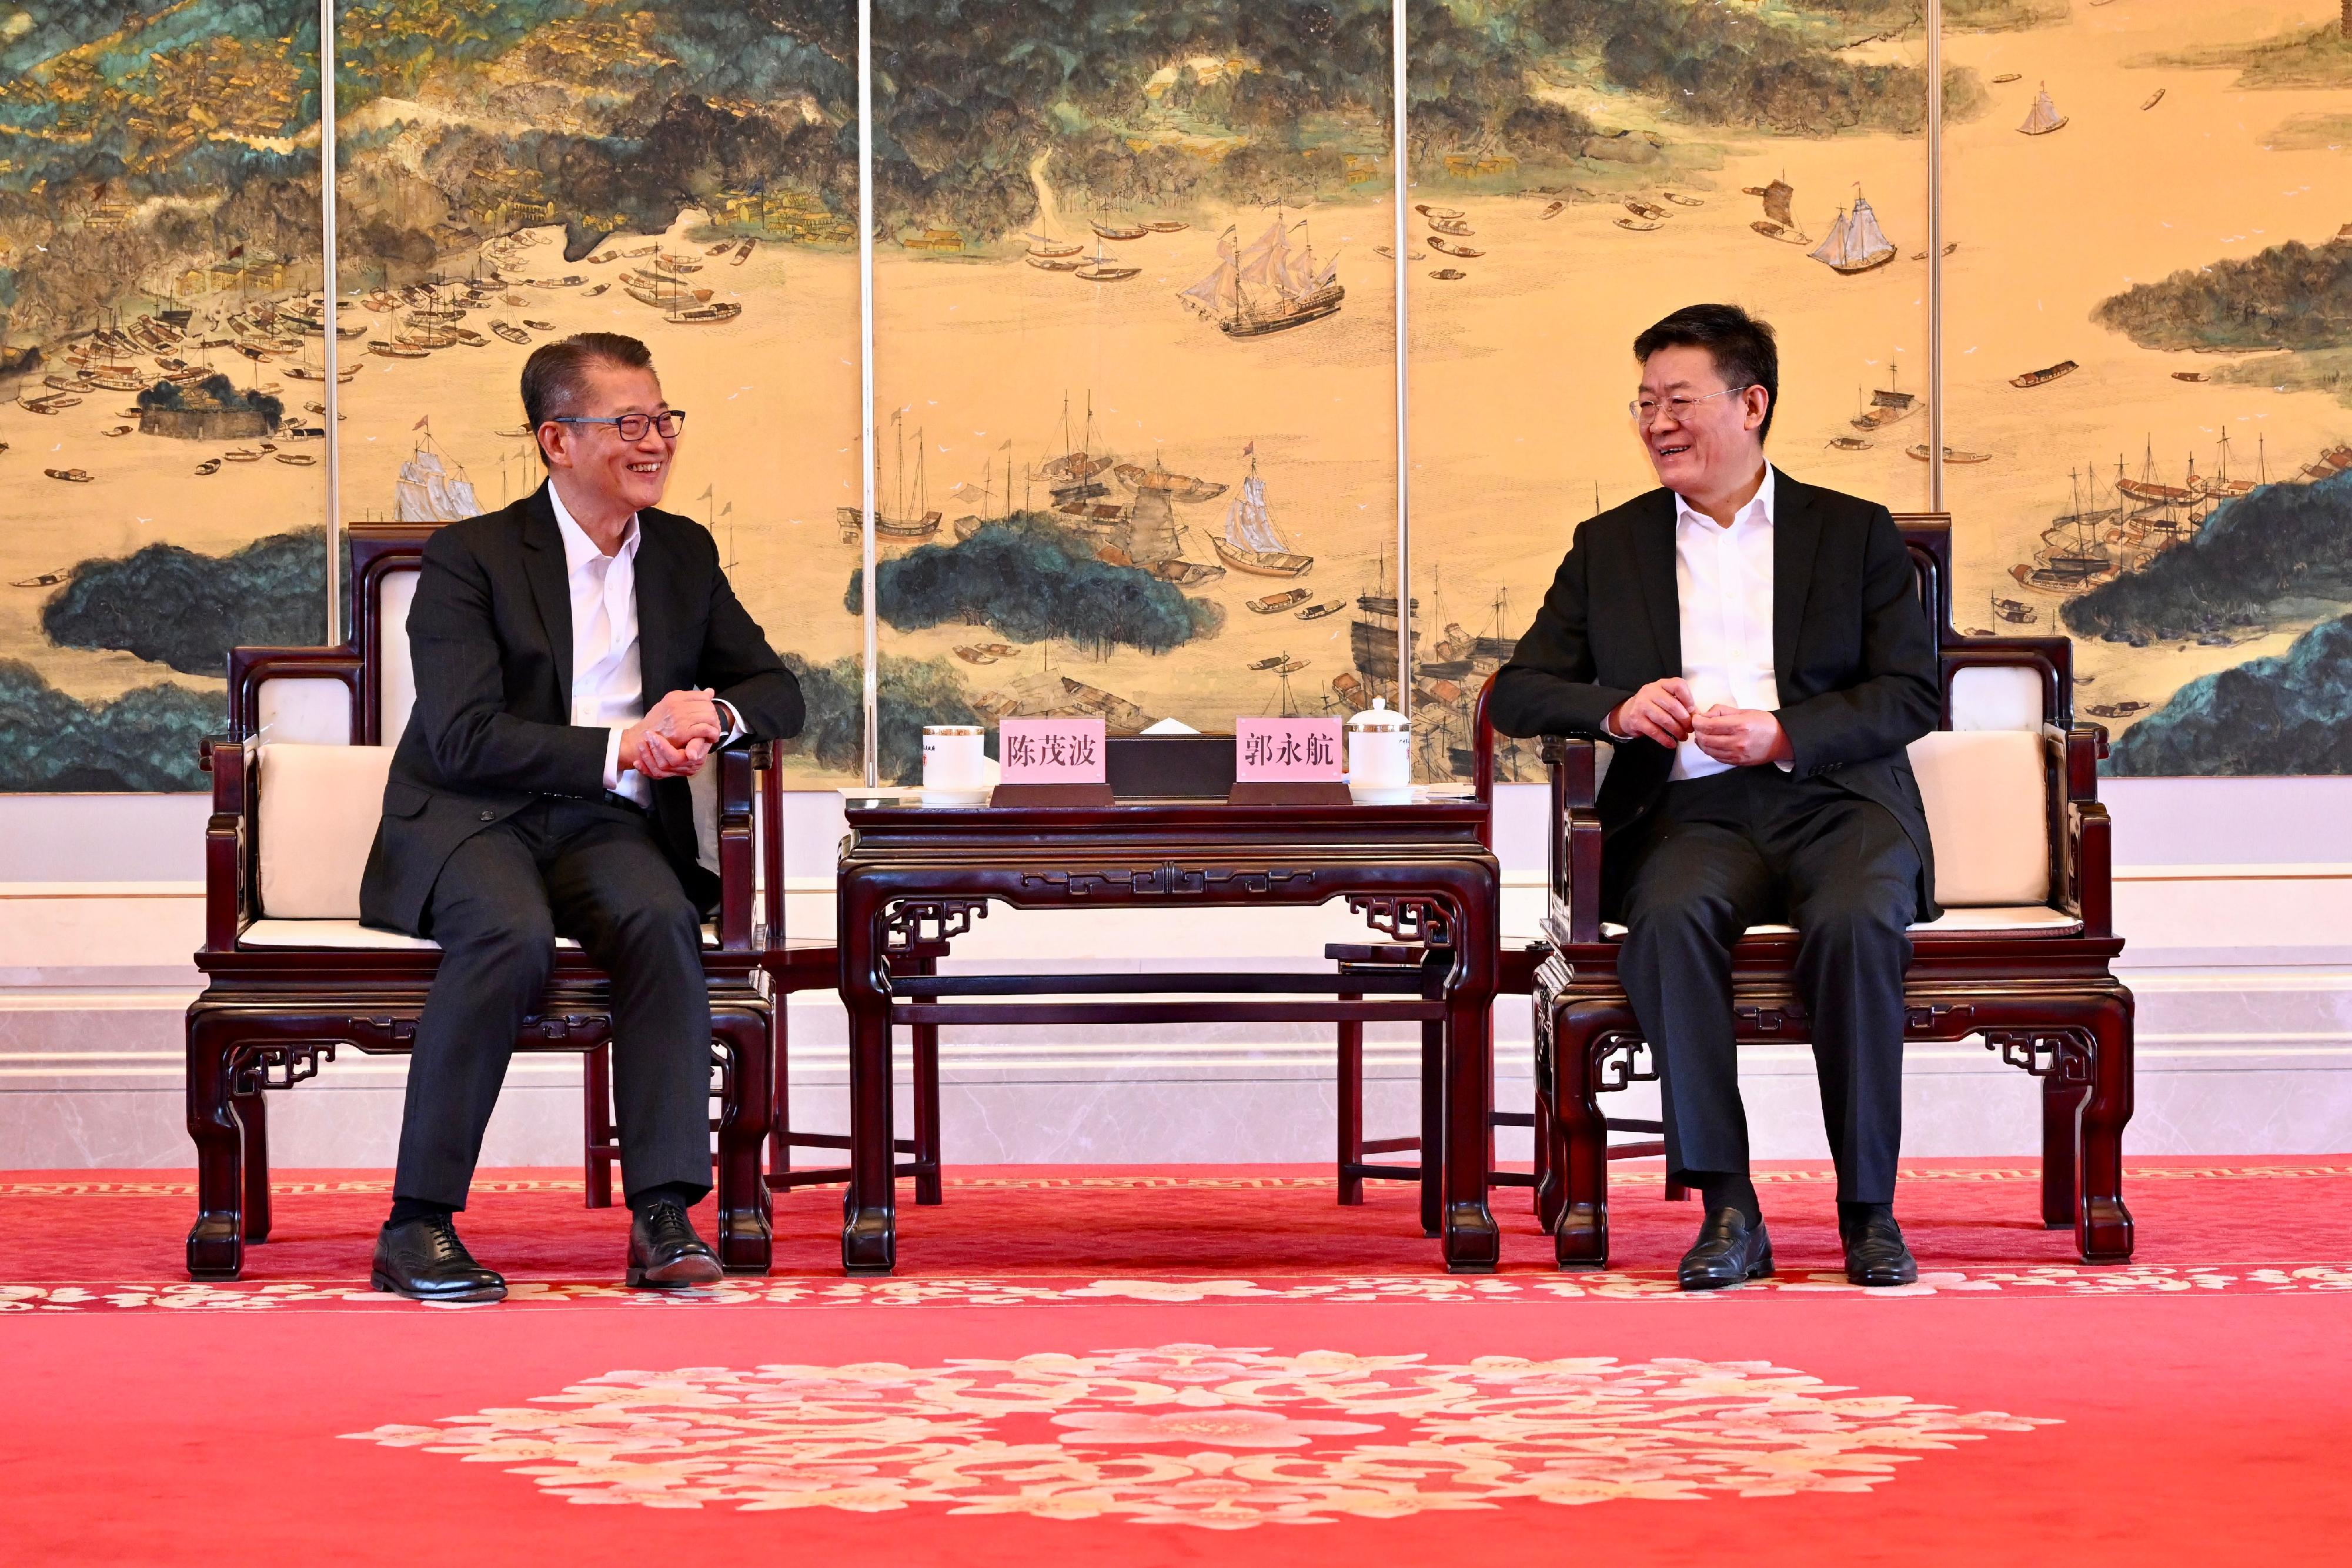 The Financial Secretary, Mr Paul Chan (left), today (March 15) visits Guangzhou and meets with the Mayor of the Guangzhou Municipal Government, Mr Guo Yonghang (right).